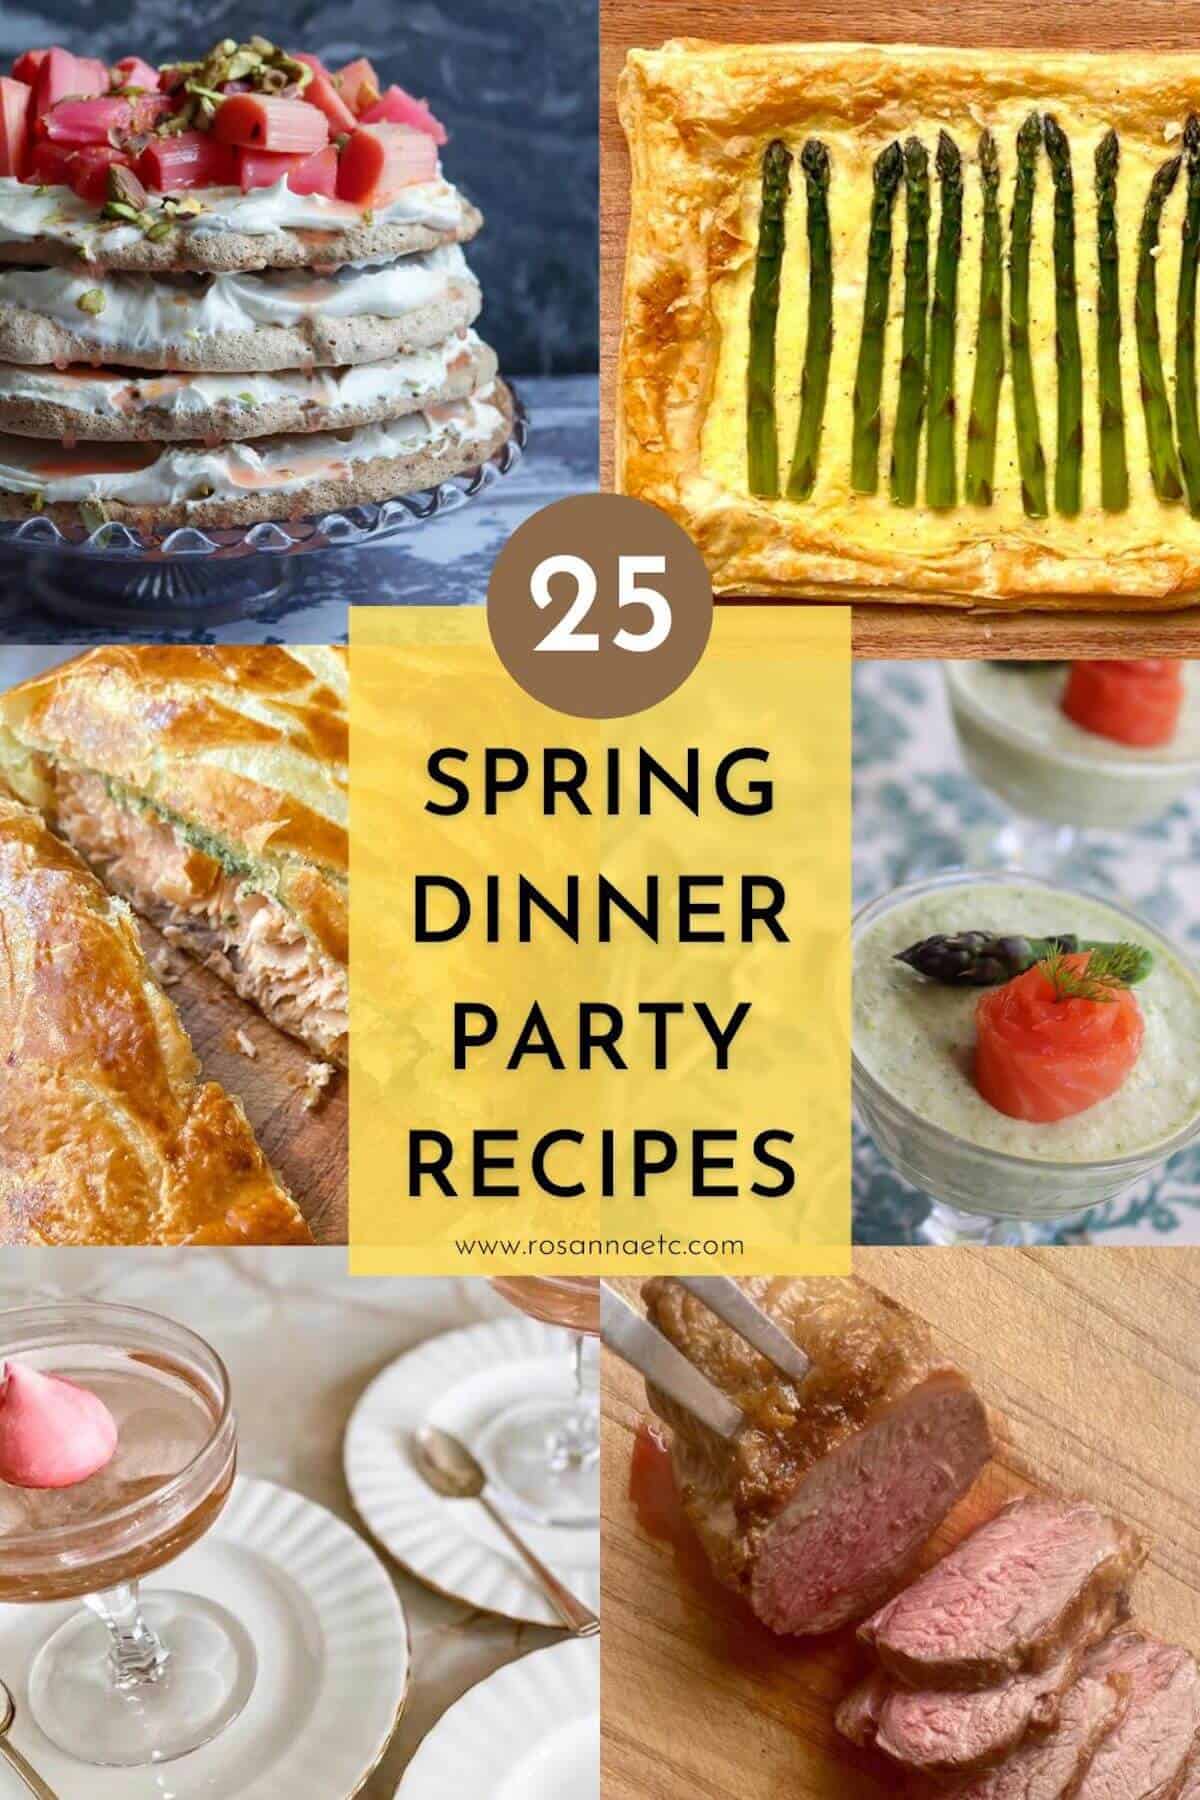 Image shows several Spring dinner party recipes.